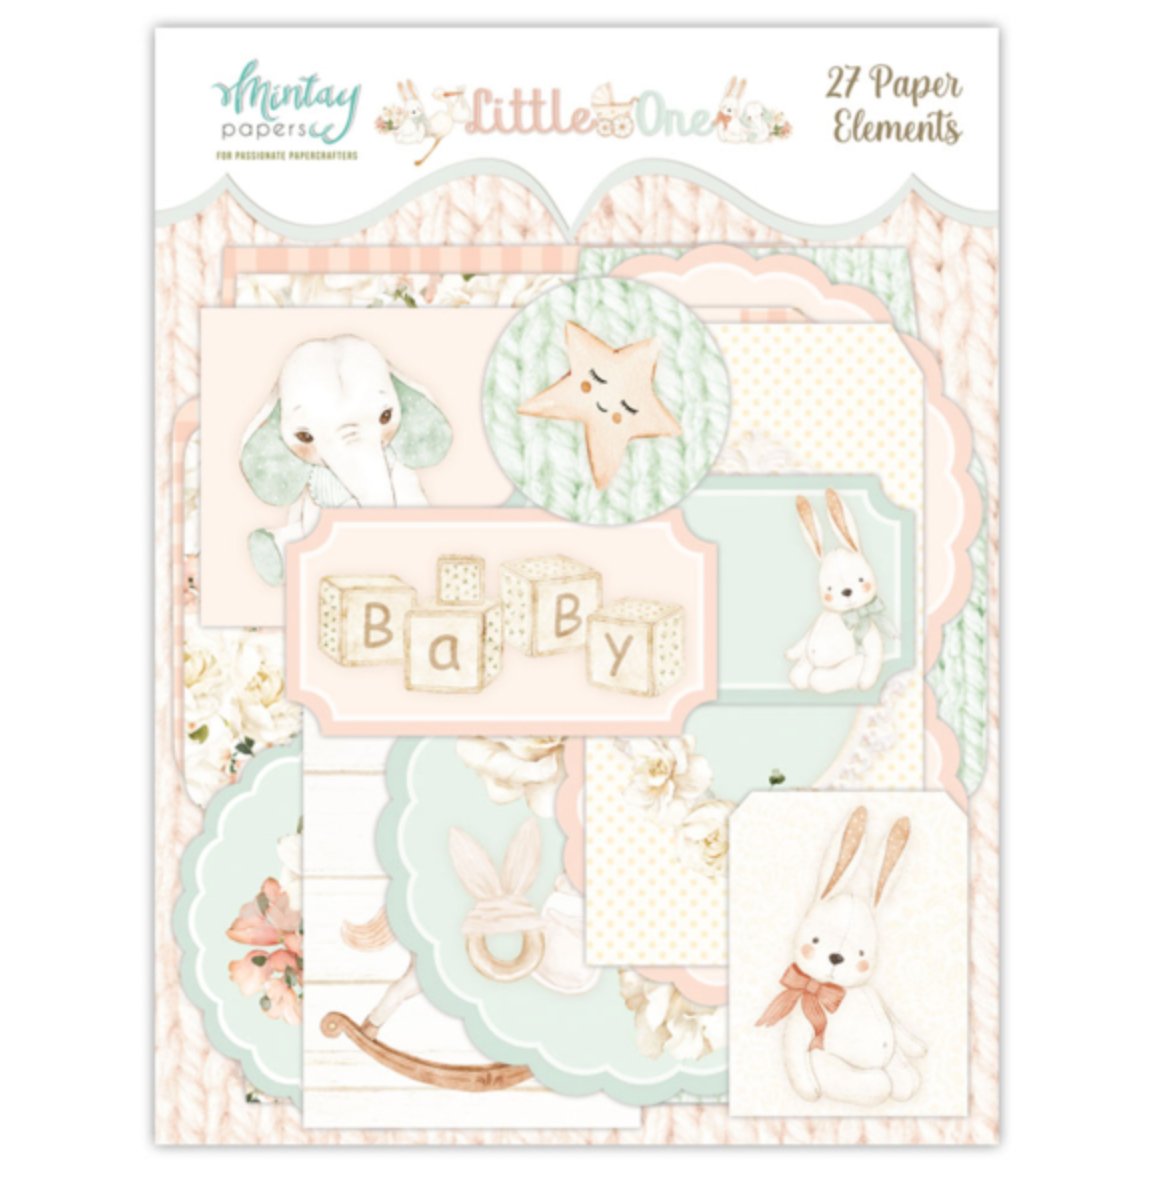 Little One - Paper Elements - 27 pcs - Mintay Papers